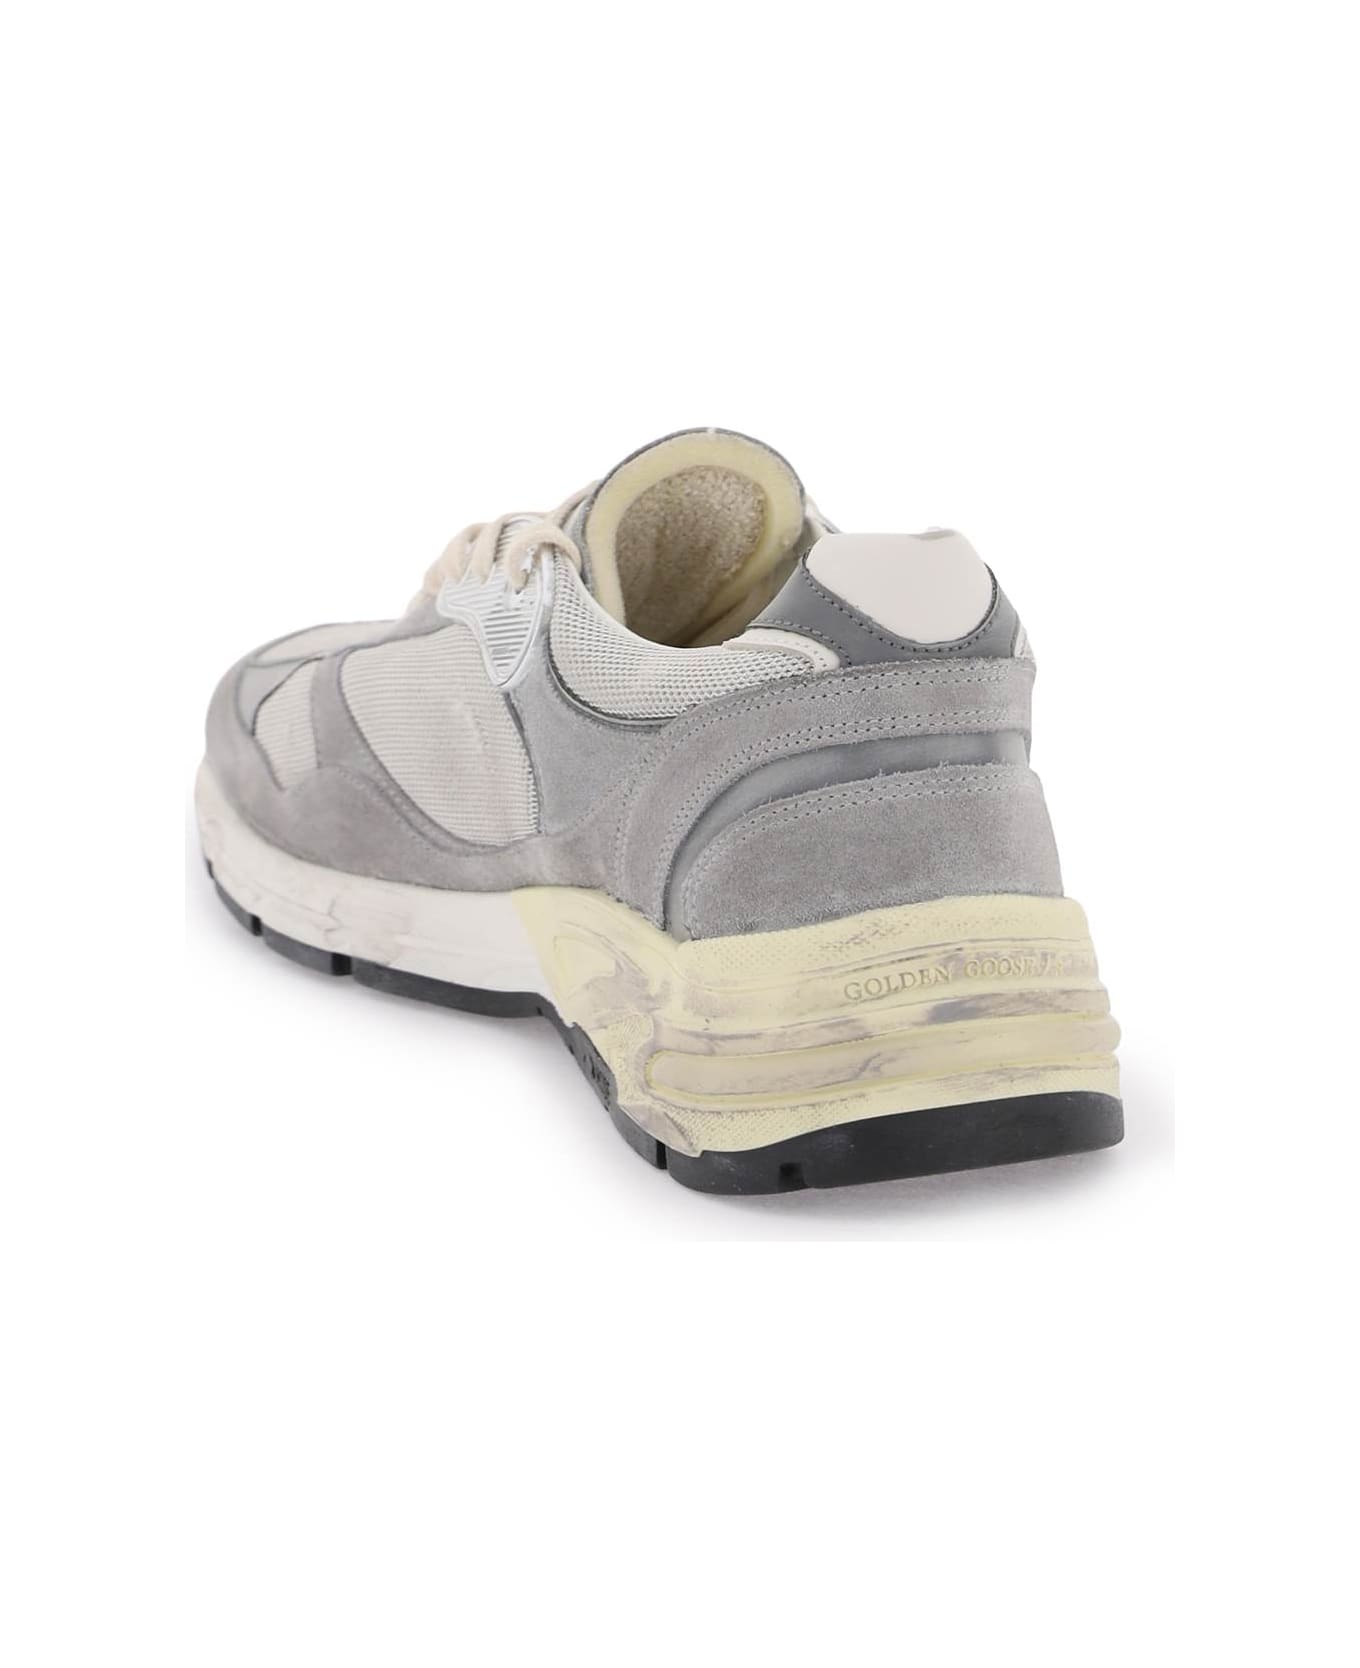 Golden Goose Dad-star Sneakers - GREY SILVER WHITE (Grey)